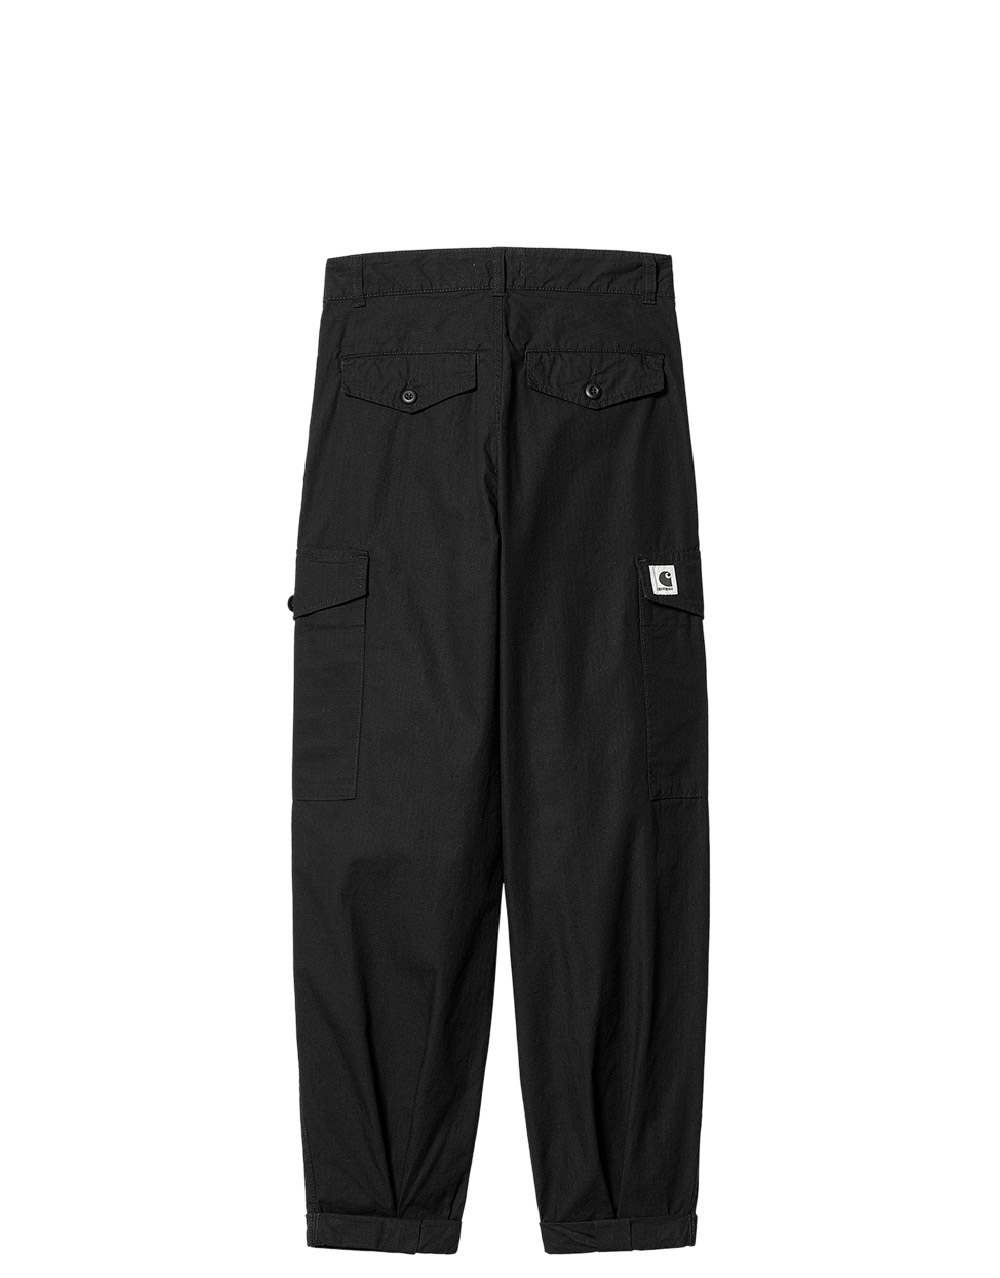 Carhartt WIP – W’ Collins Pant